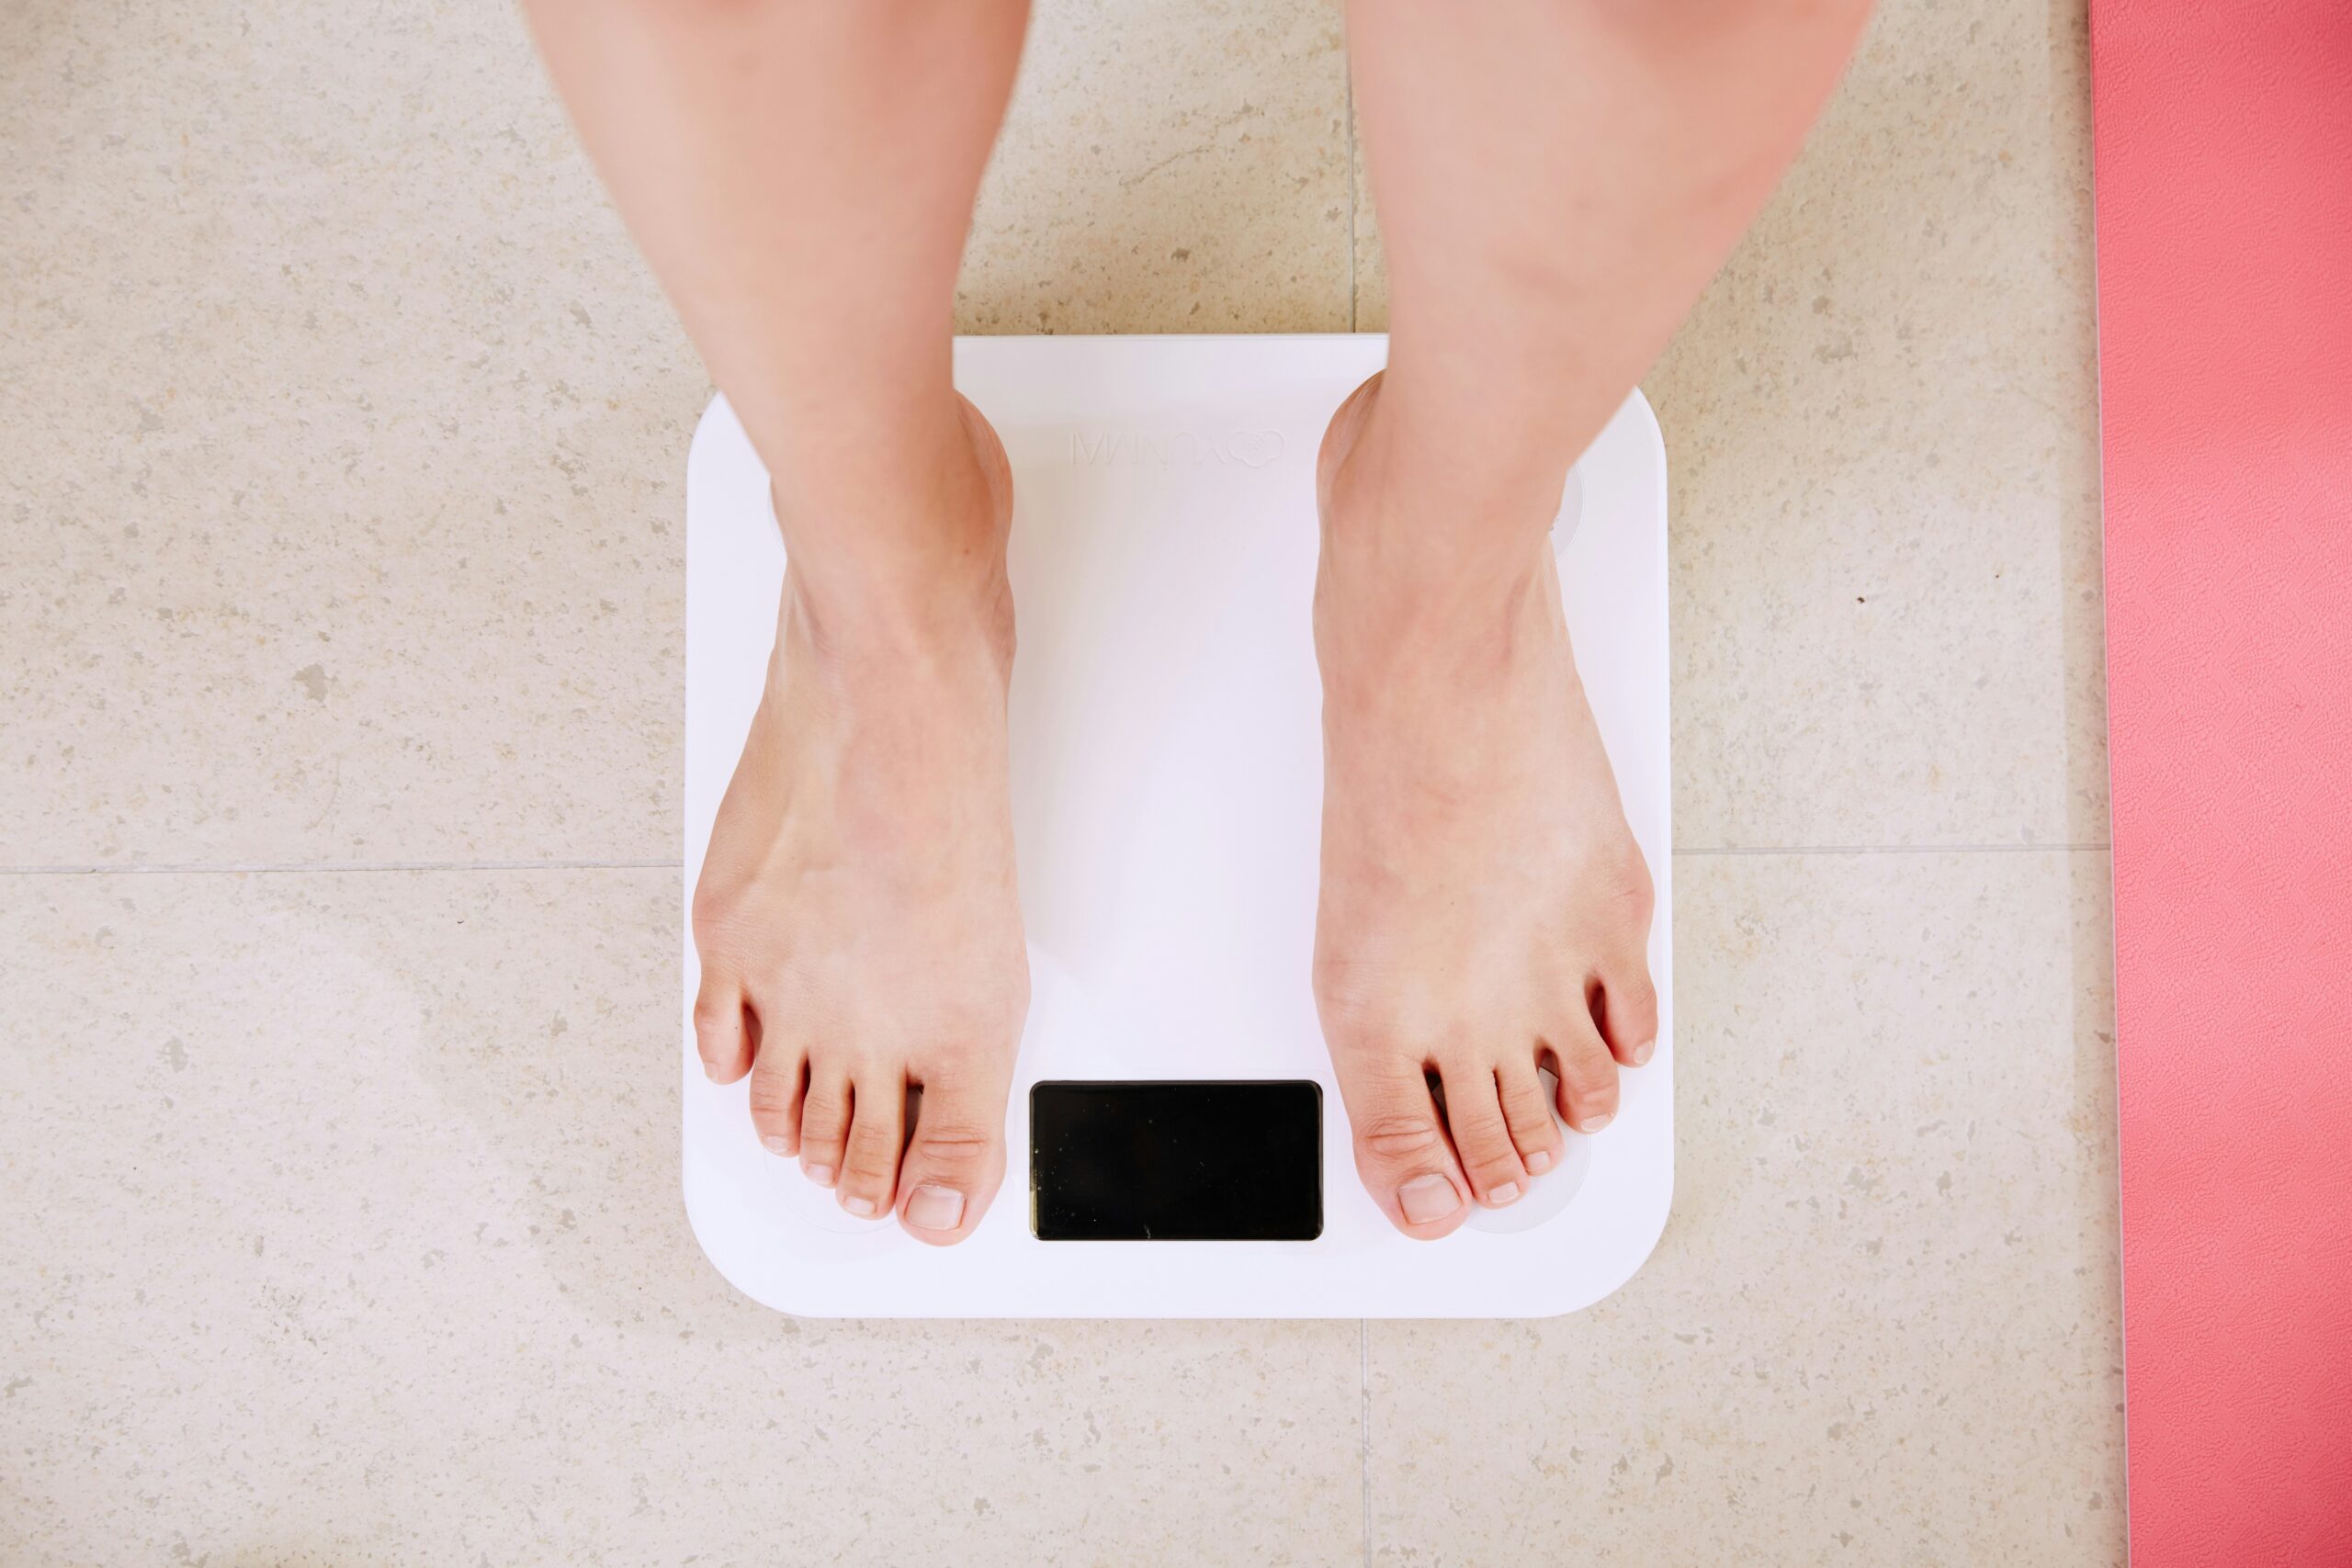 Lean Digital: How Apps and Services Can Help Control Weight | Healthcare IT Today